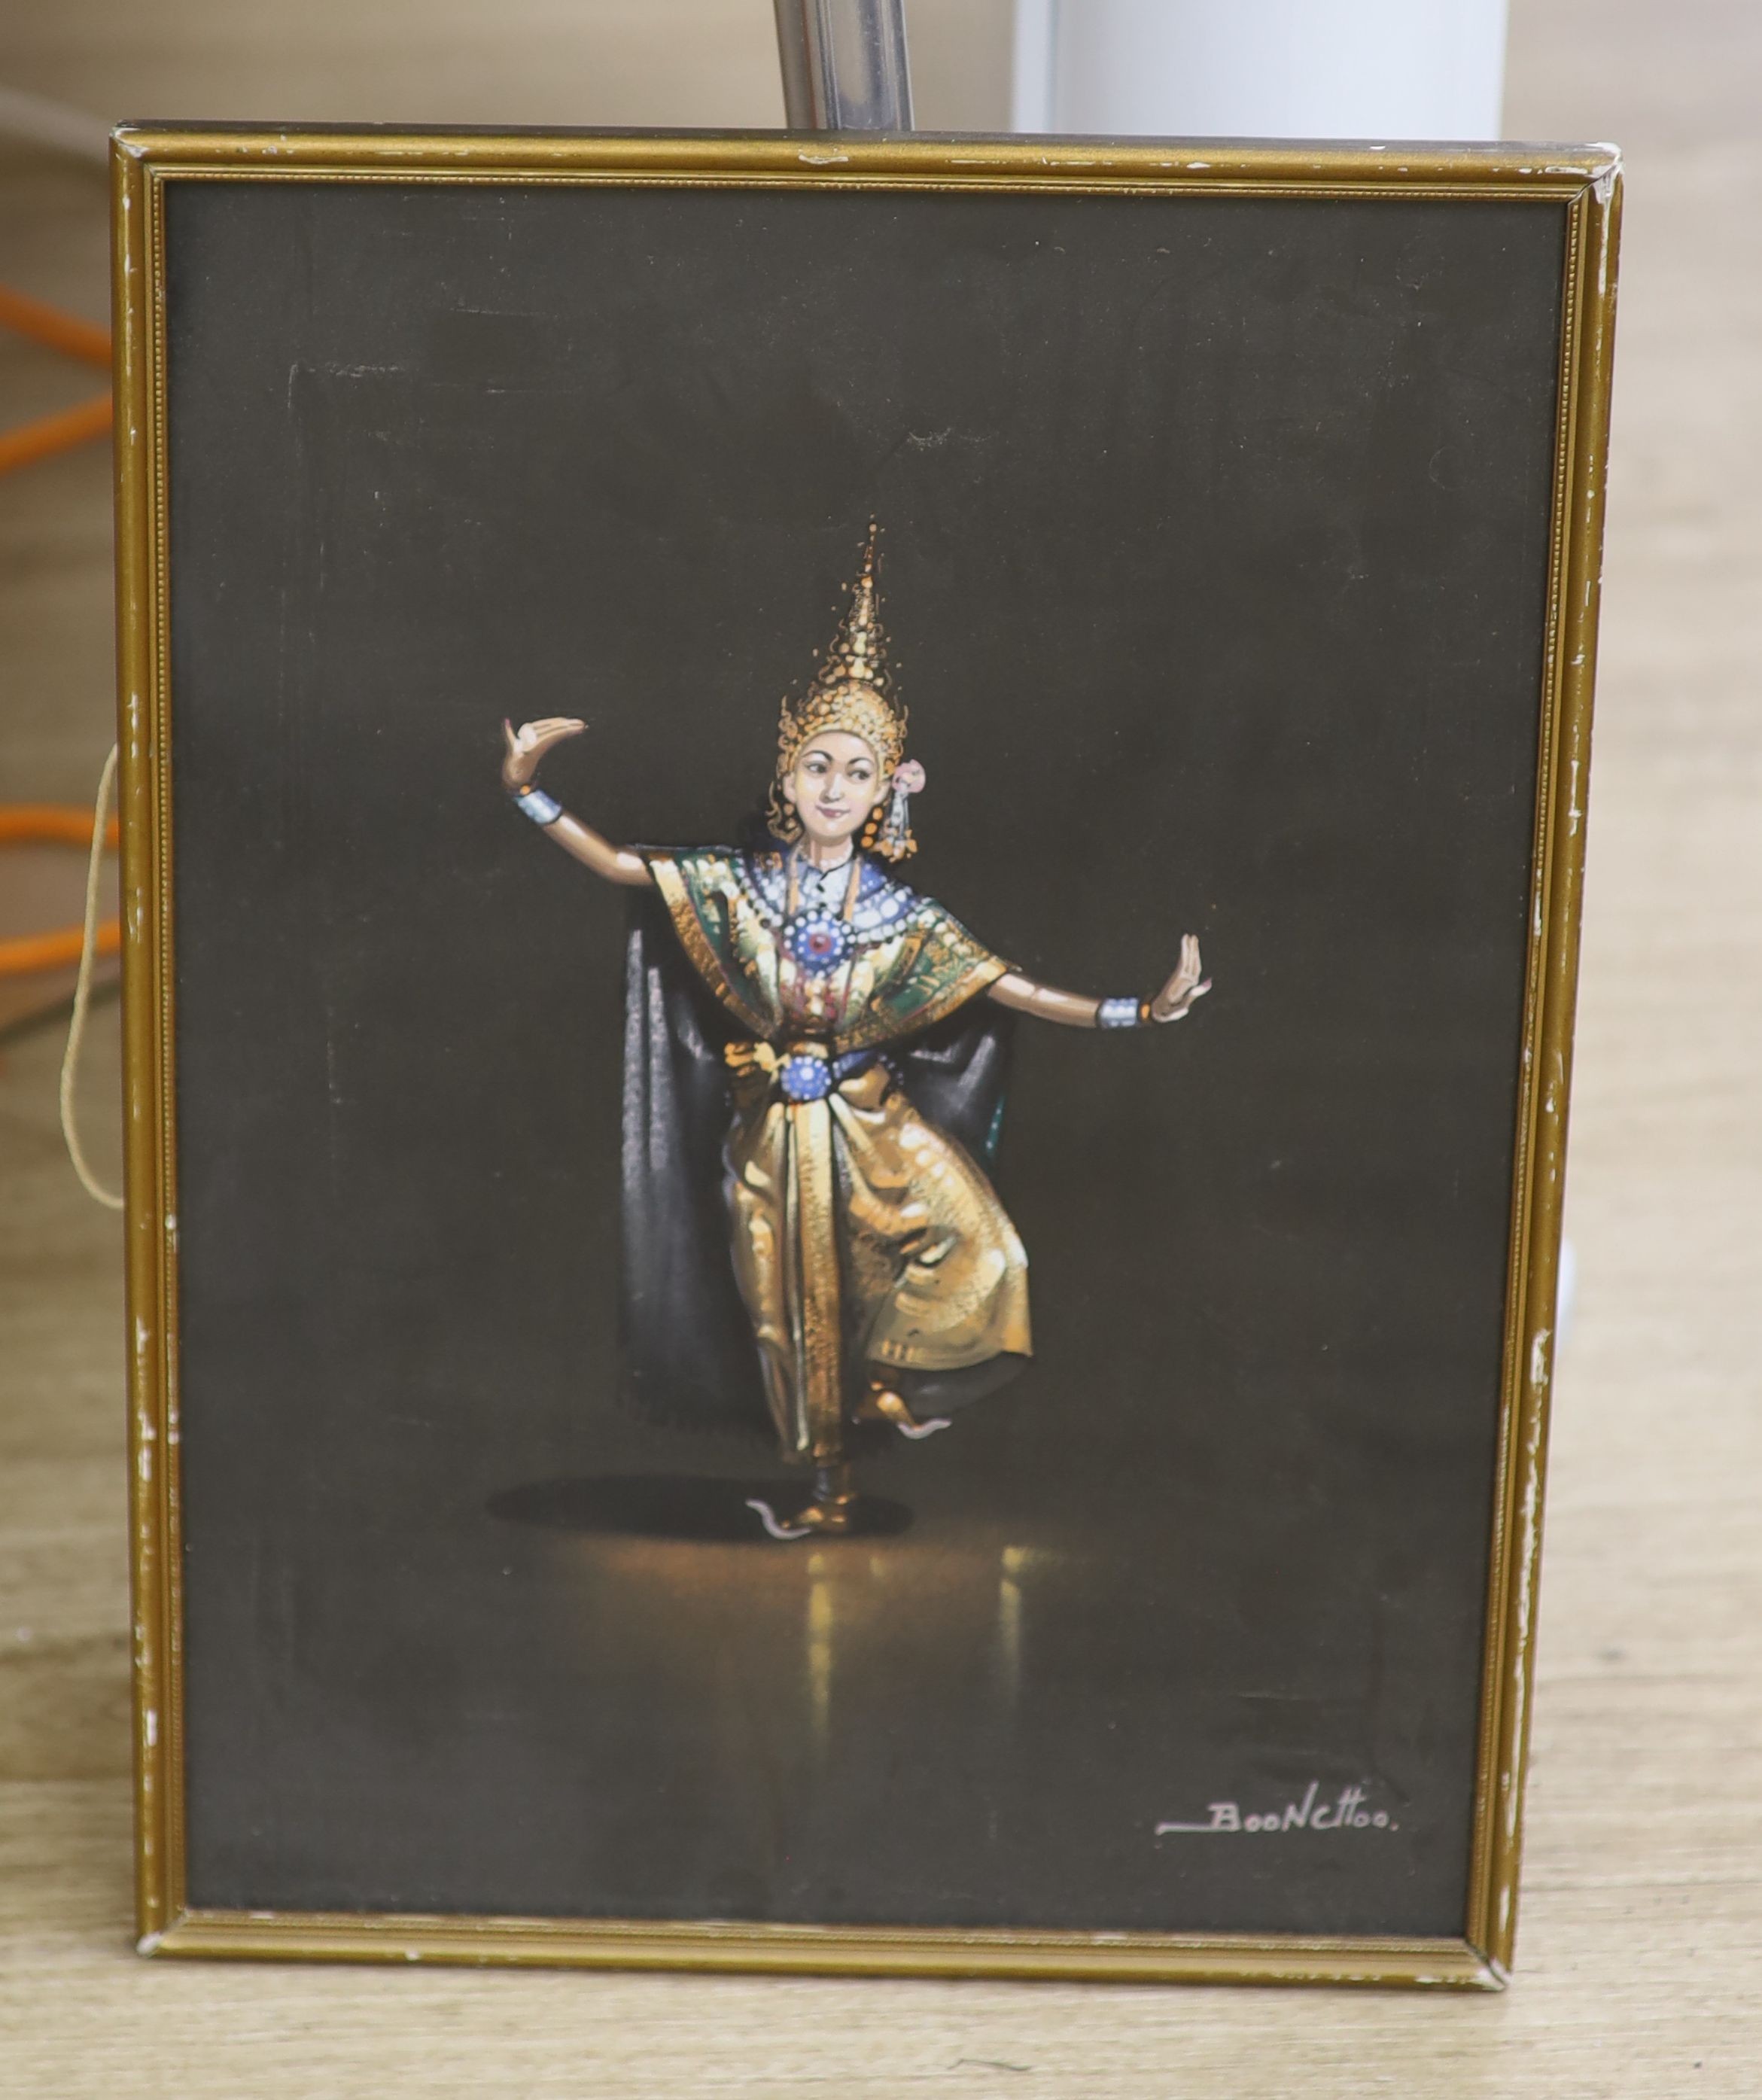 Booncttoo, gouache on black paper, Siamese dancer, signed, 36 x 26cm